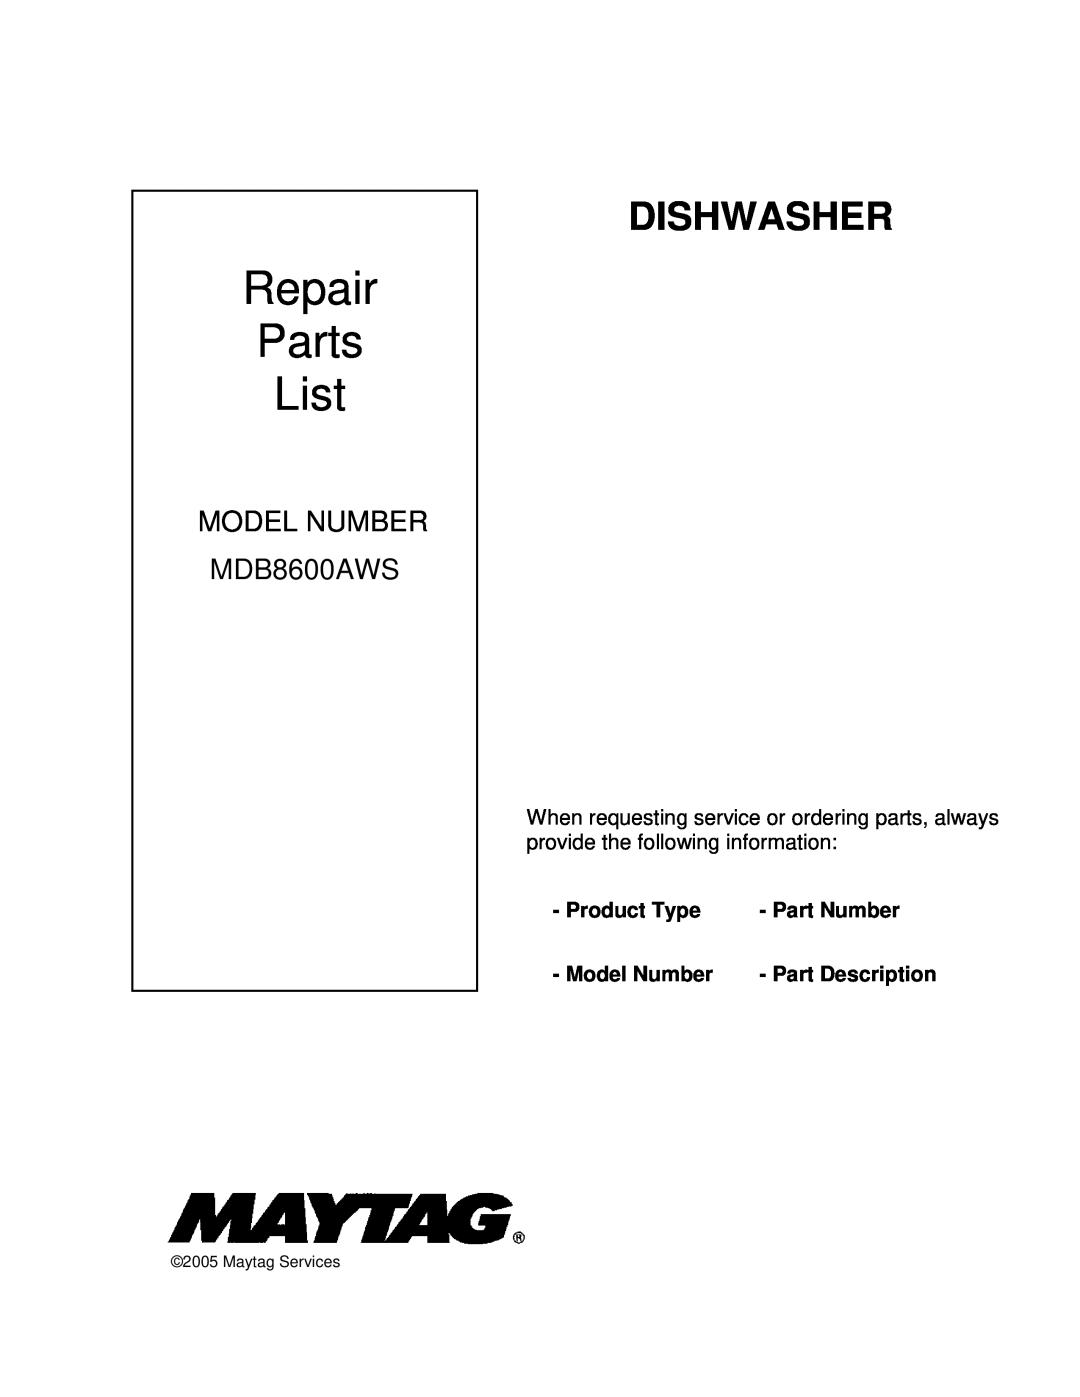 Maytag MDB8600AWS manual Product Type, Part Number, Model Number, Part Description, Repair Parts List, Dishwasher 